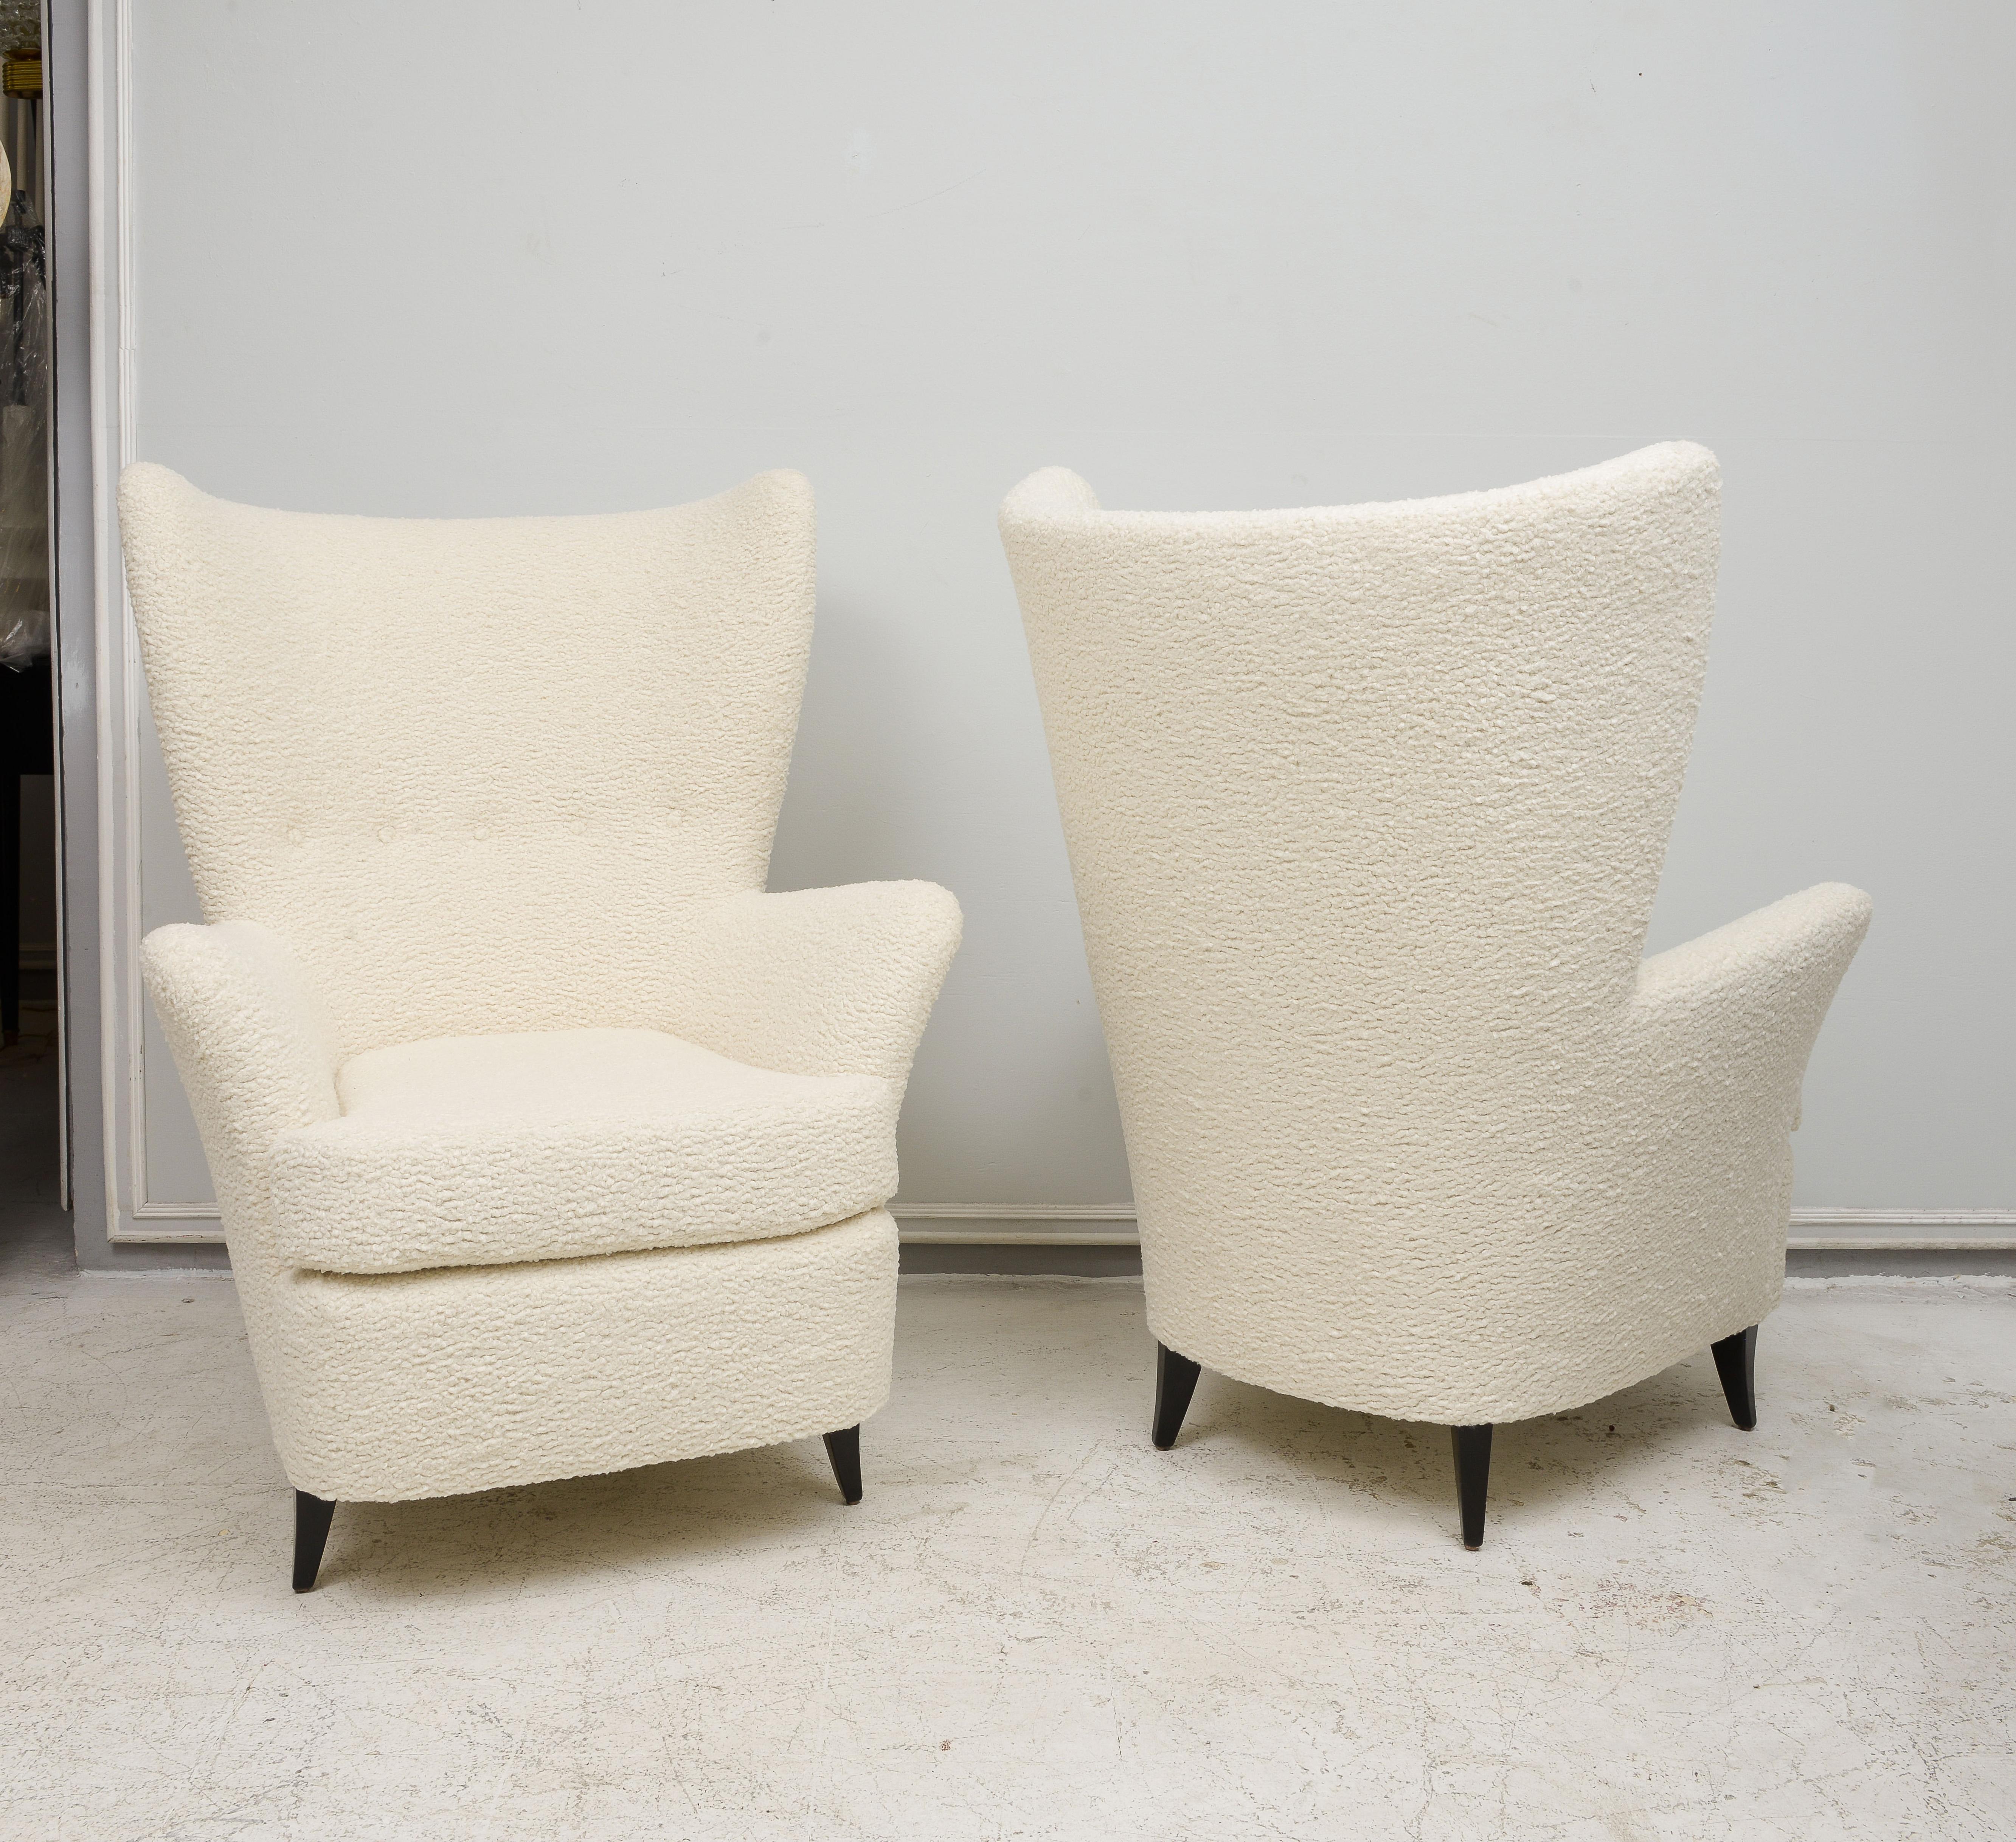 Mid-20th Century Pair of Italian Mid-Century Modern Lounge Chairs For Sale